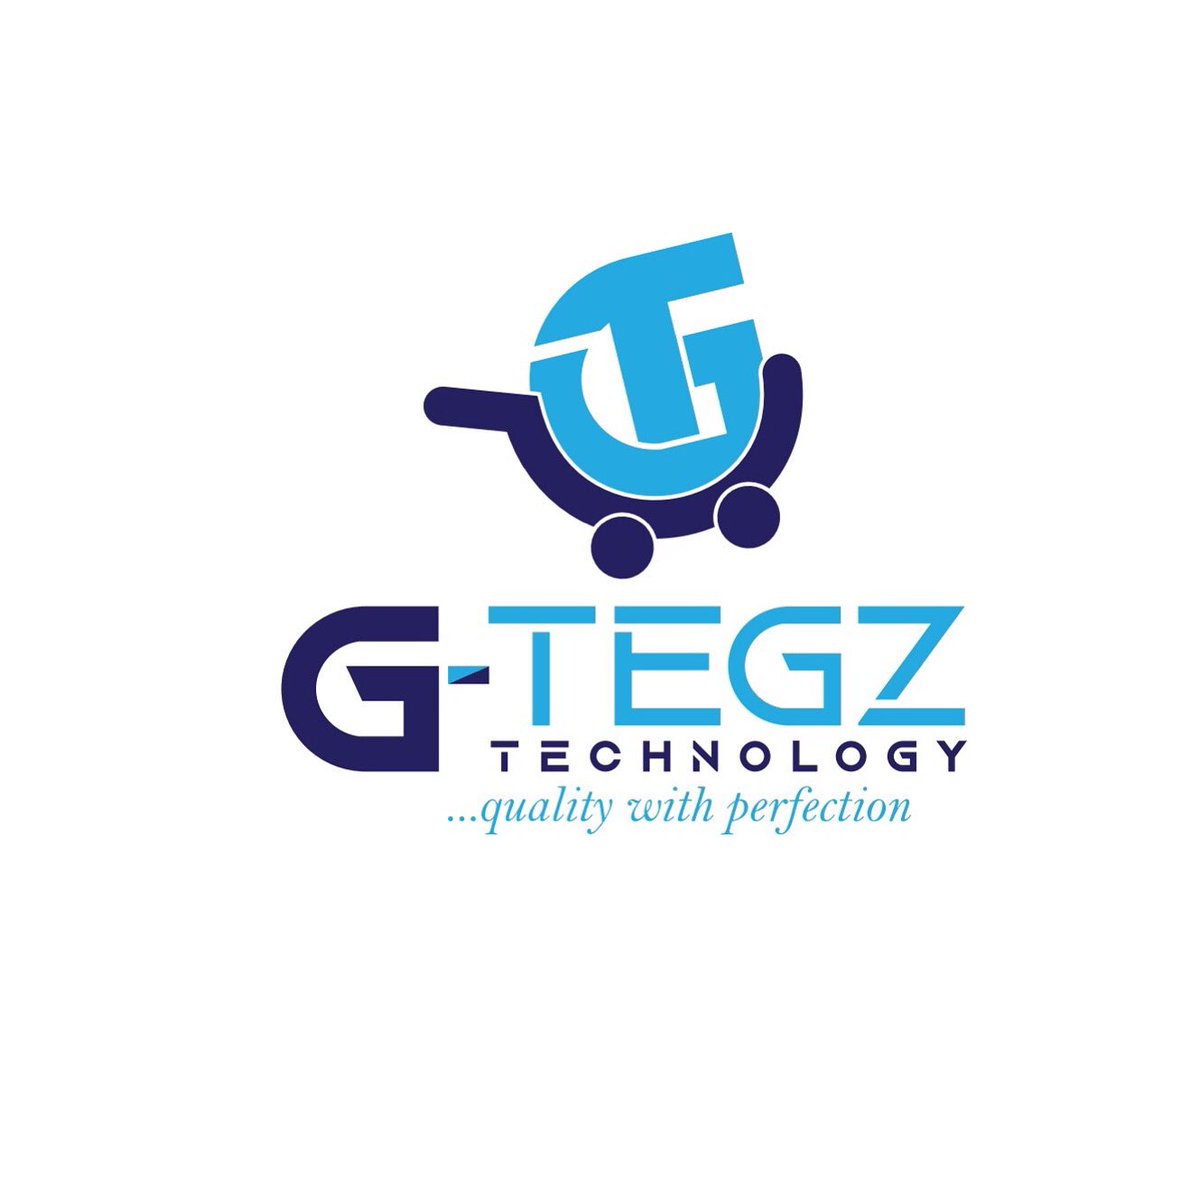 Power interruption can be a thing of the past. G-Tegz Technology is here with all your solar solutions. 
.
.
.
.
.
.
.
.
.
.
.
#Gtegztech #Nigeria #Letsgosolar #gosolar